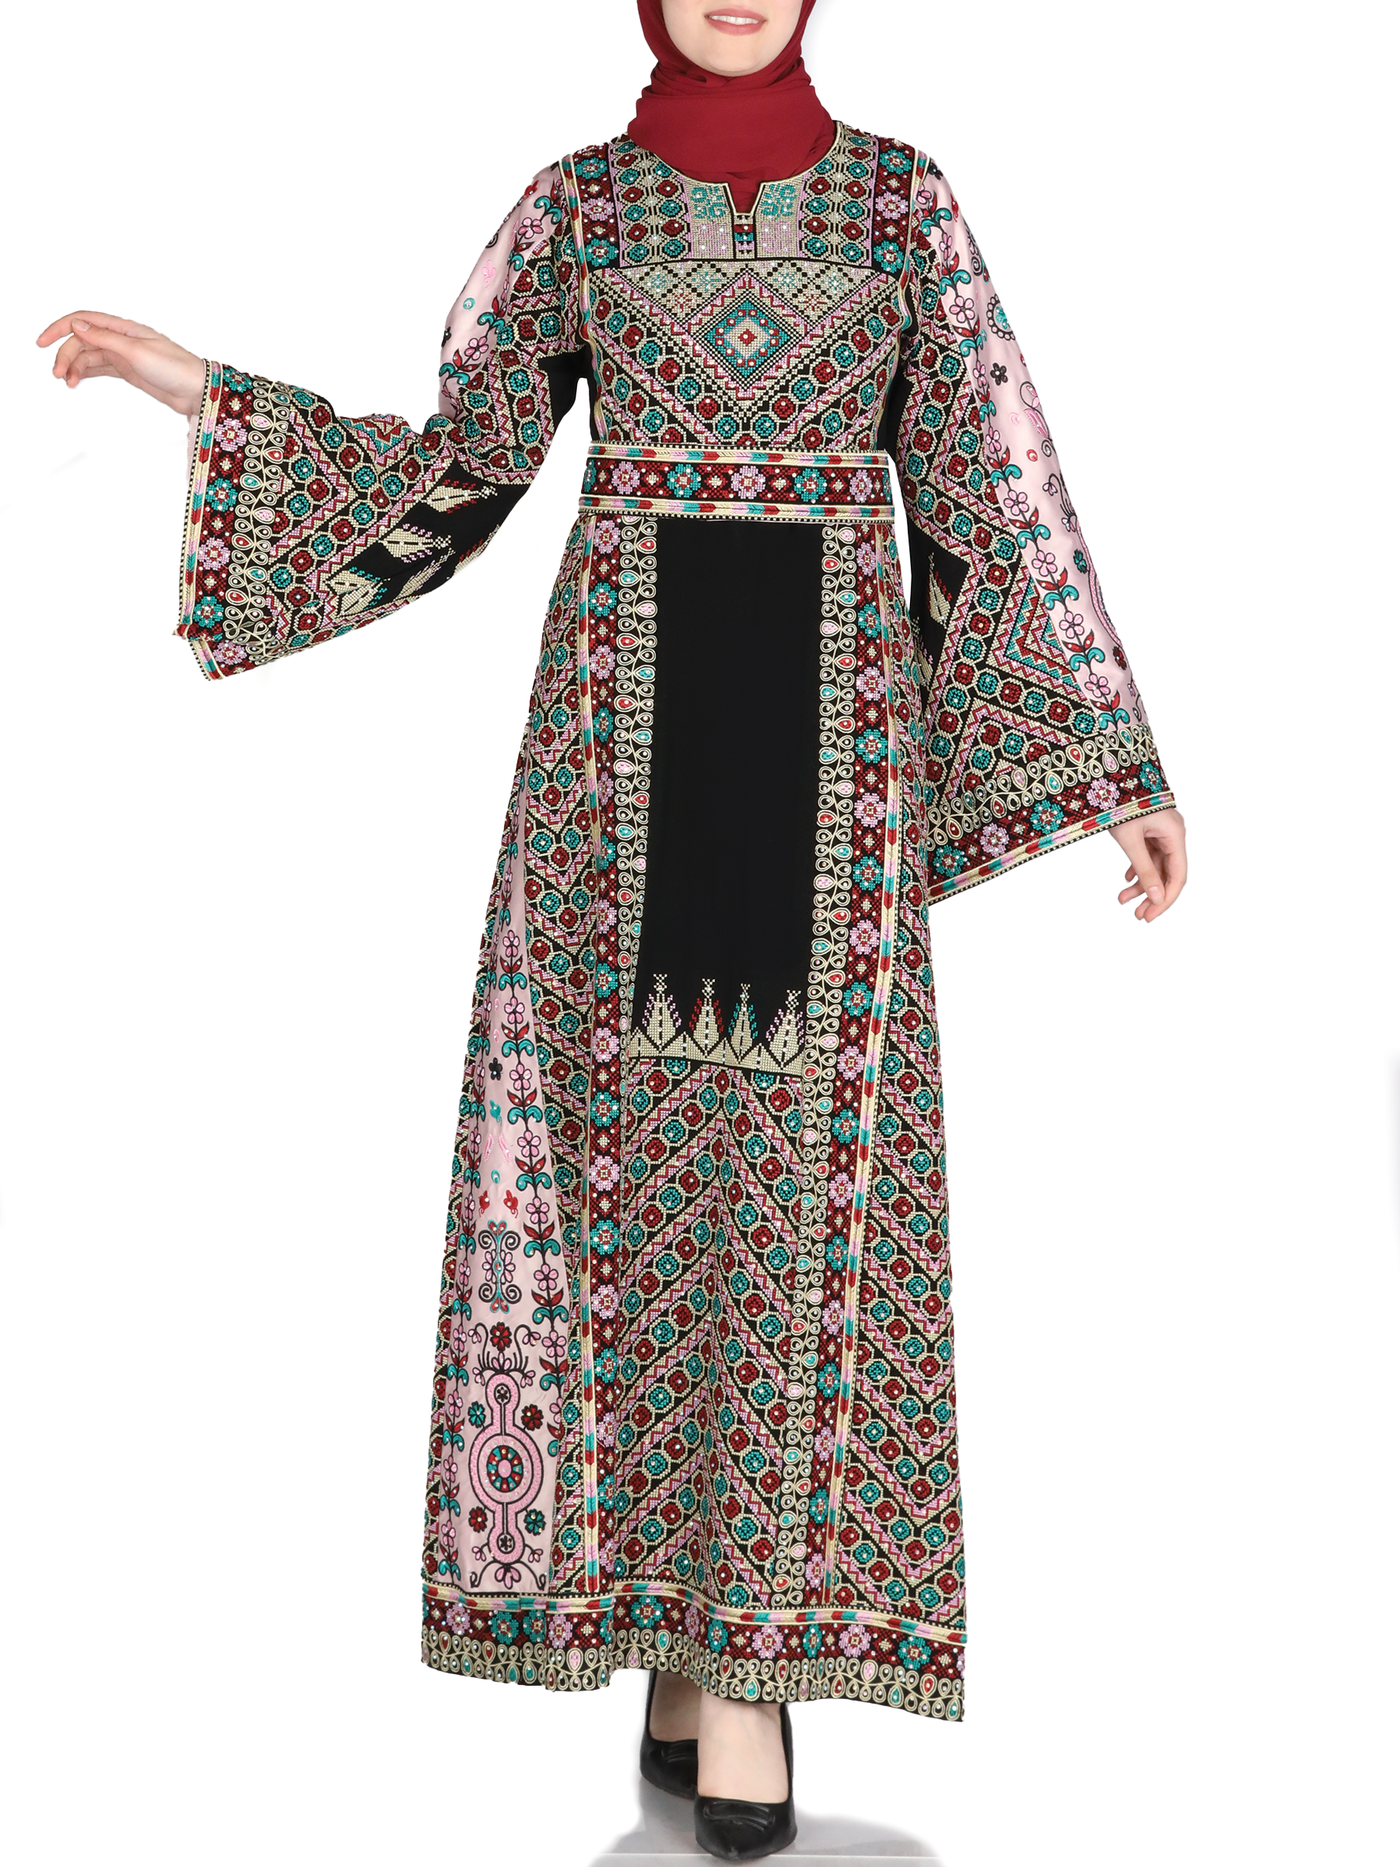 Jewel of Tulkarem - High Quality Embroidered Palestinian style Thobe